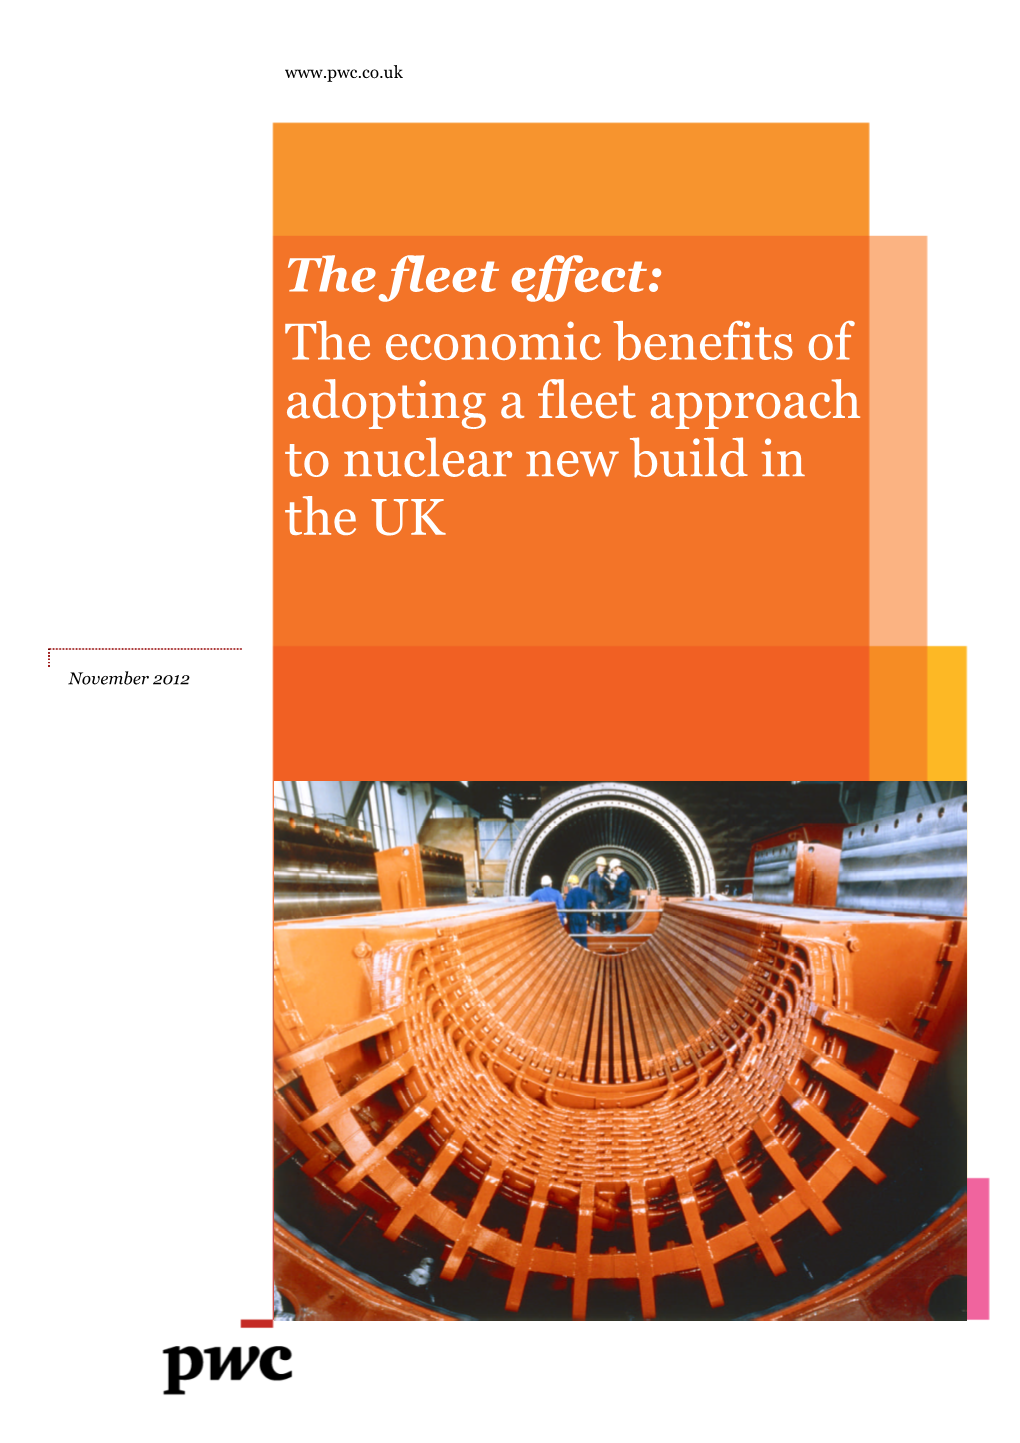 The Economic Benefits of Adopting a Fleet Approach to Nuclear New Build in the UK